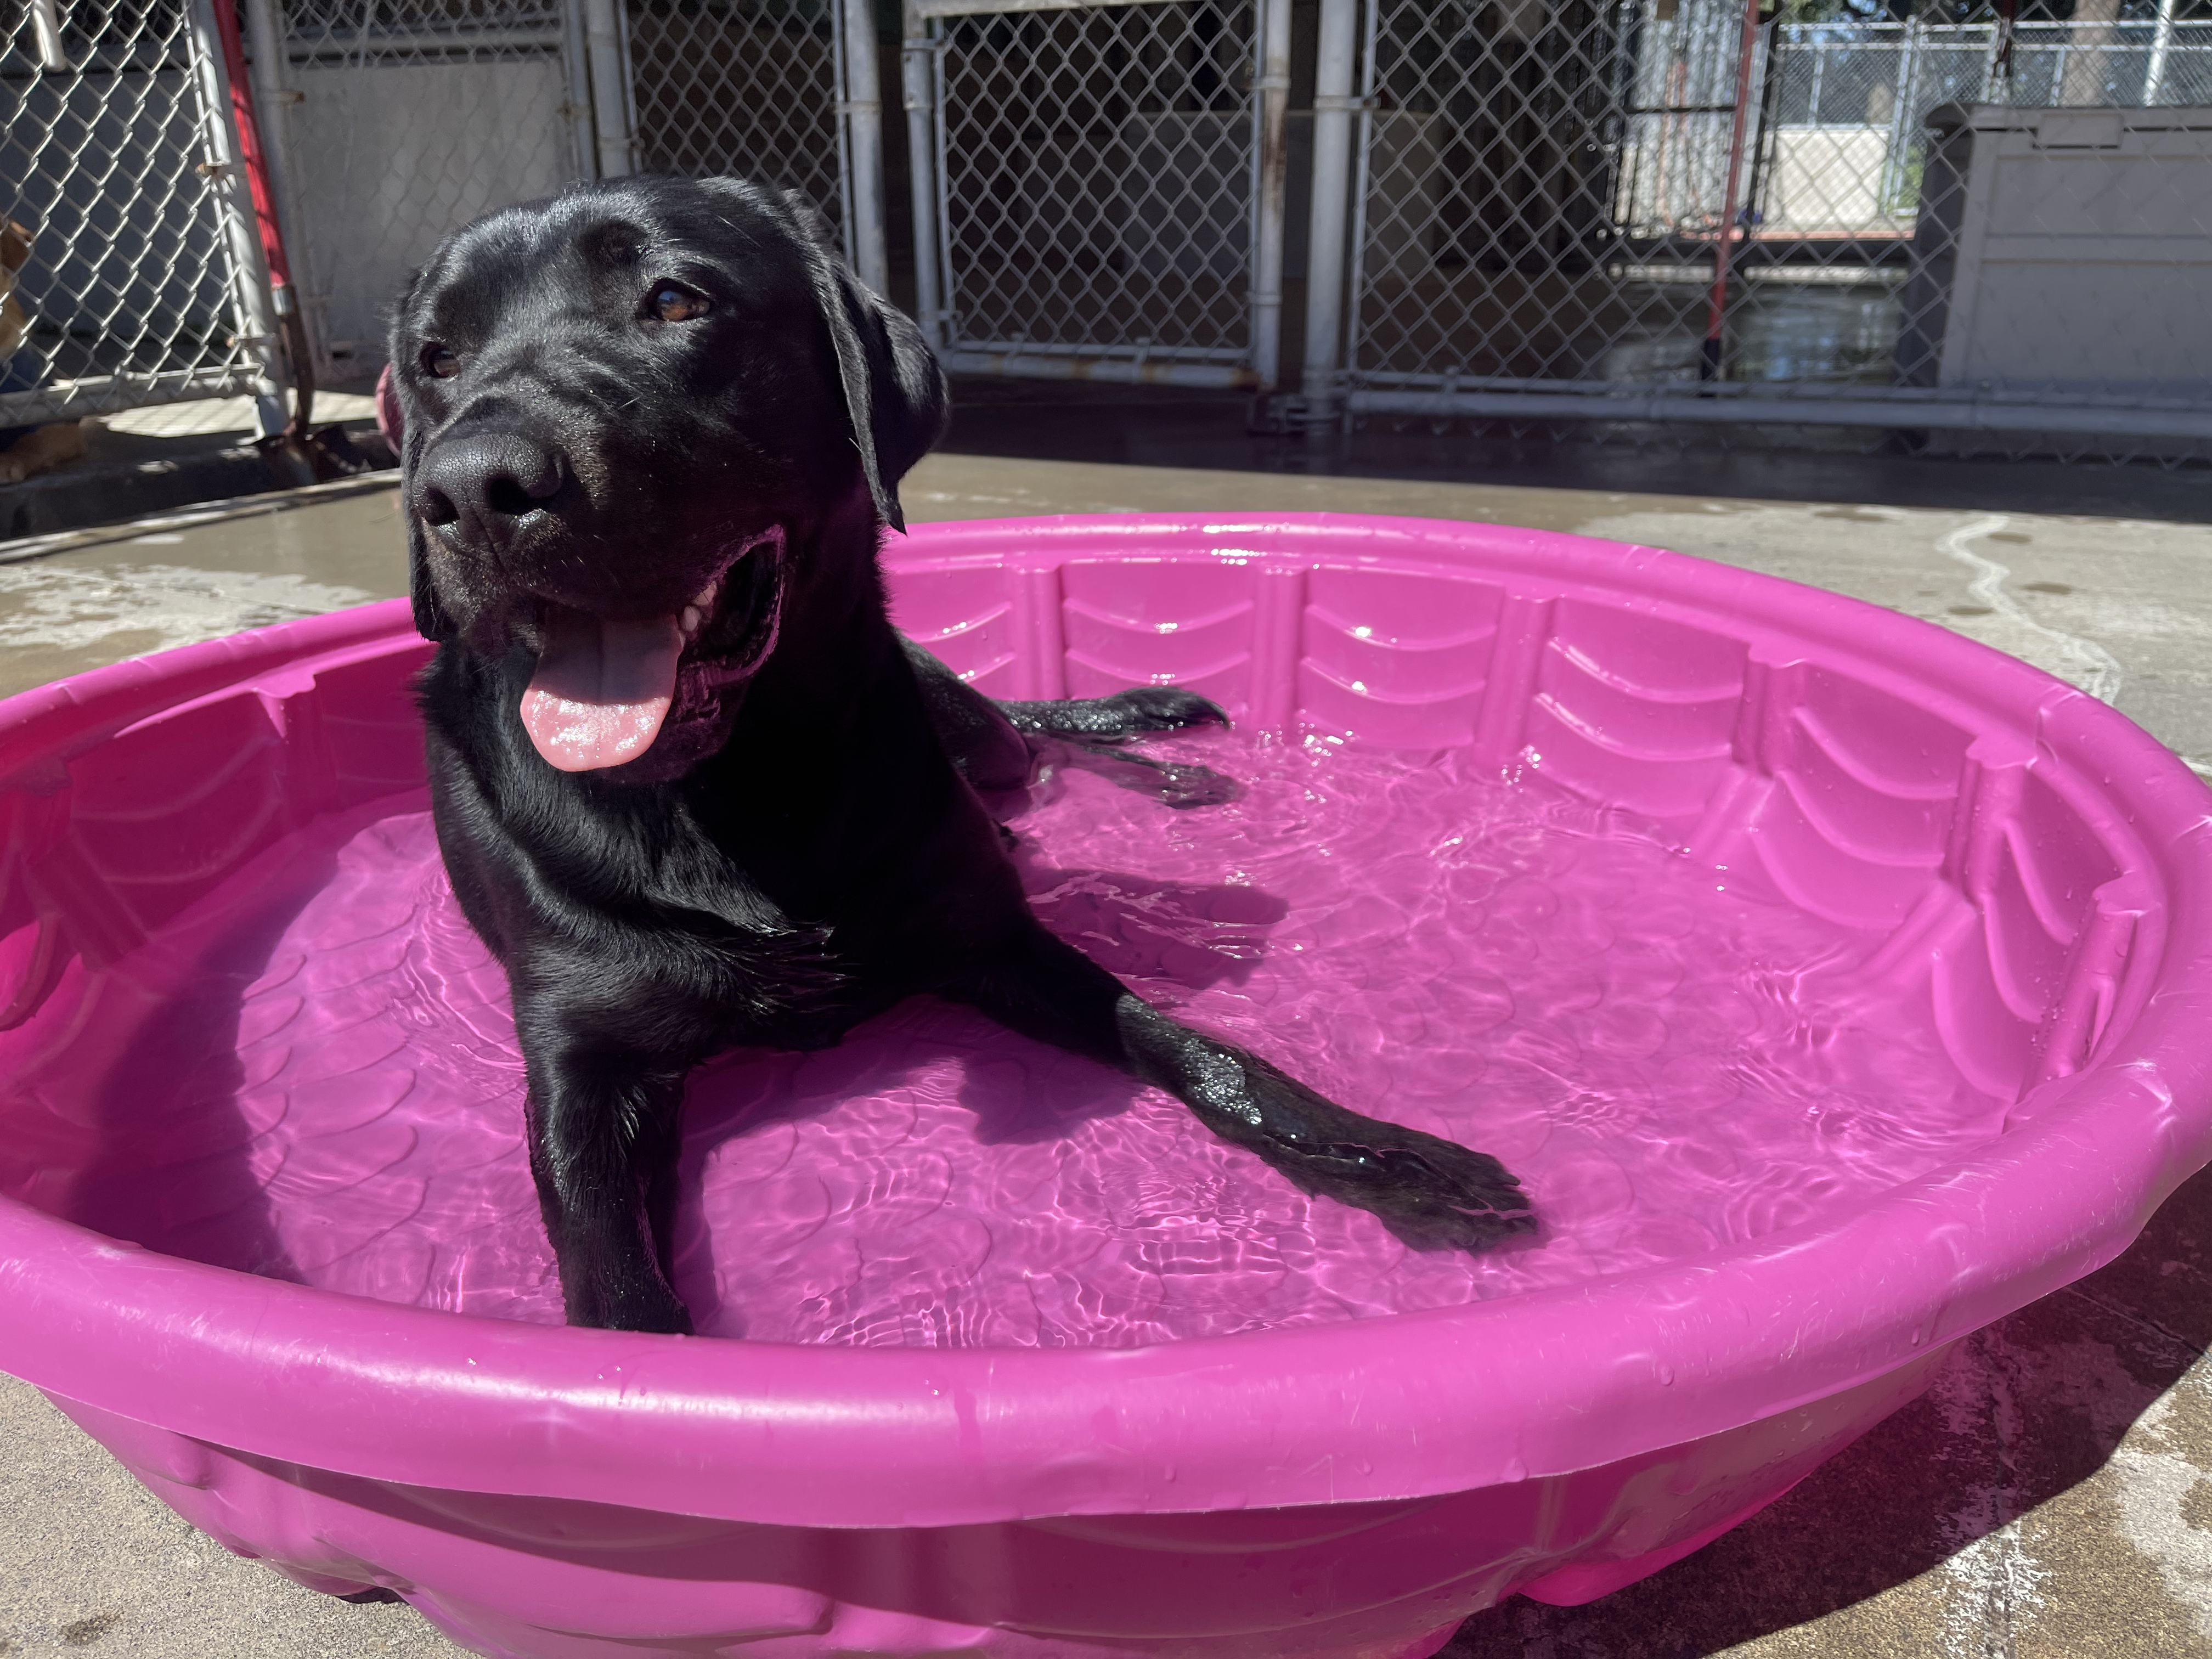 A black Lab lays happily in a pink plastic pool on a hot day.